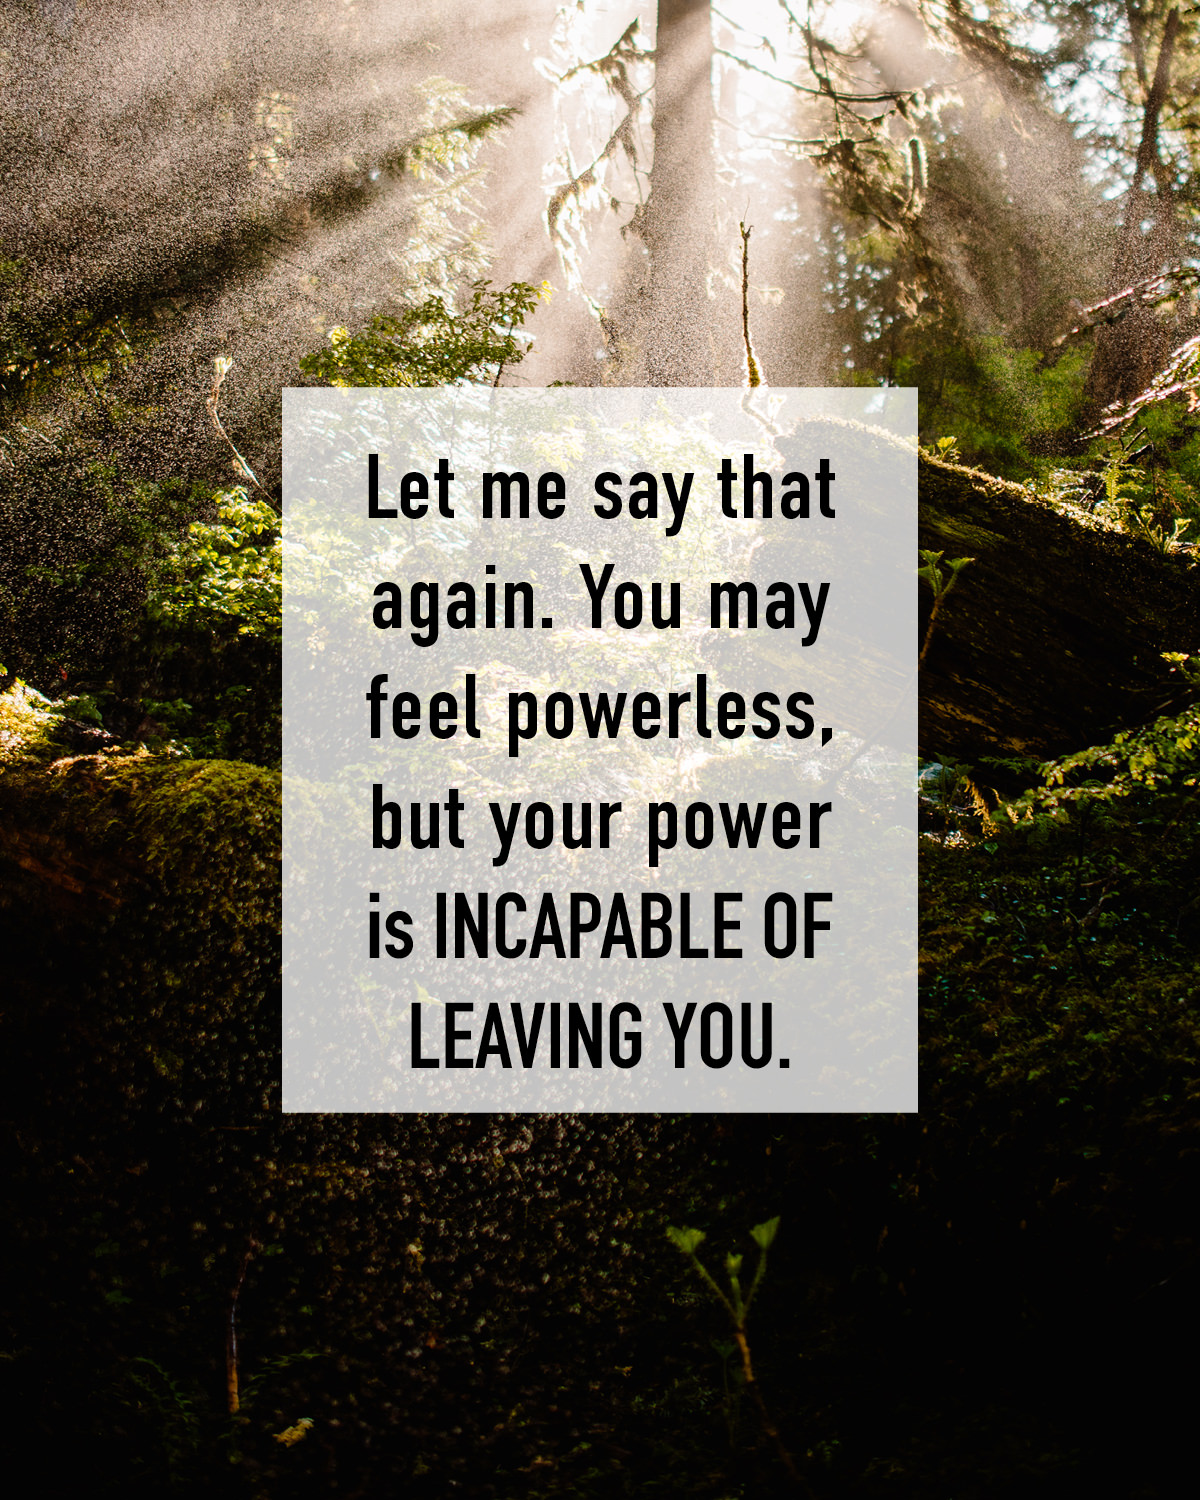 Let me say that again. You may feel powerless, but your power is incapable of leaving you.